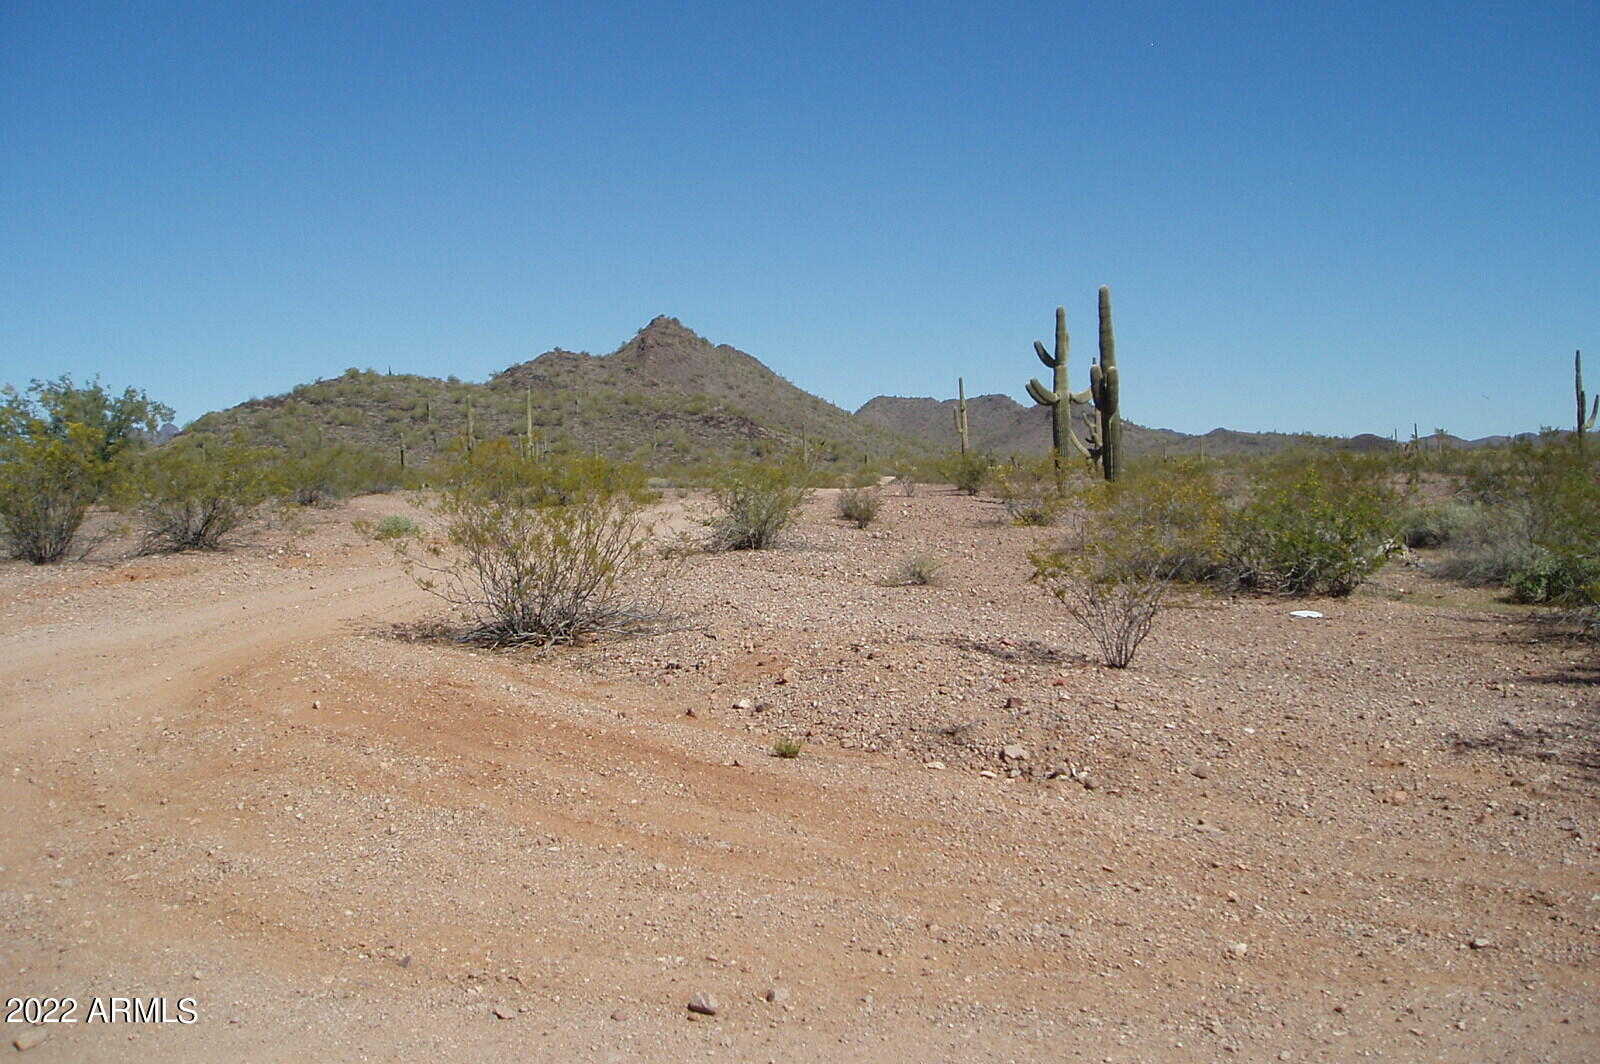 View Unincorporated County, AZ 85361 land